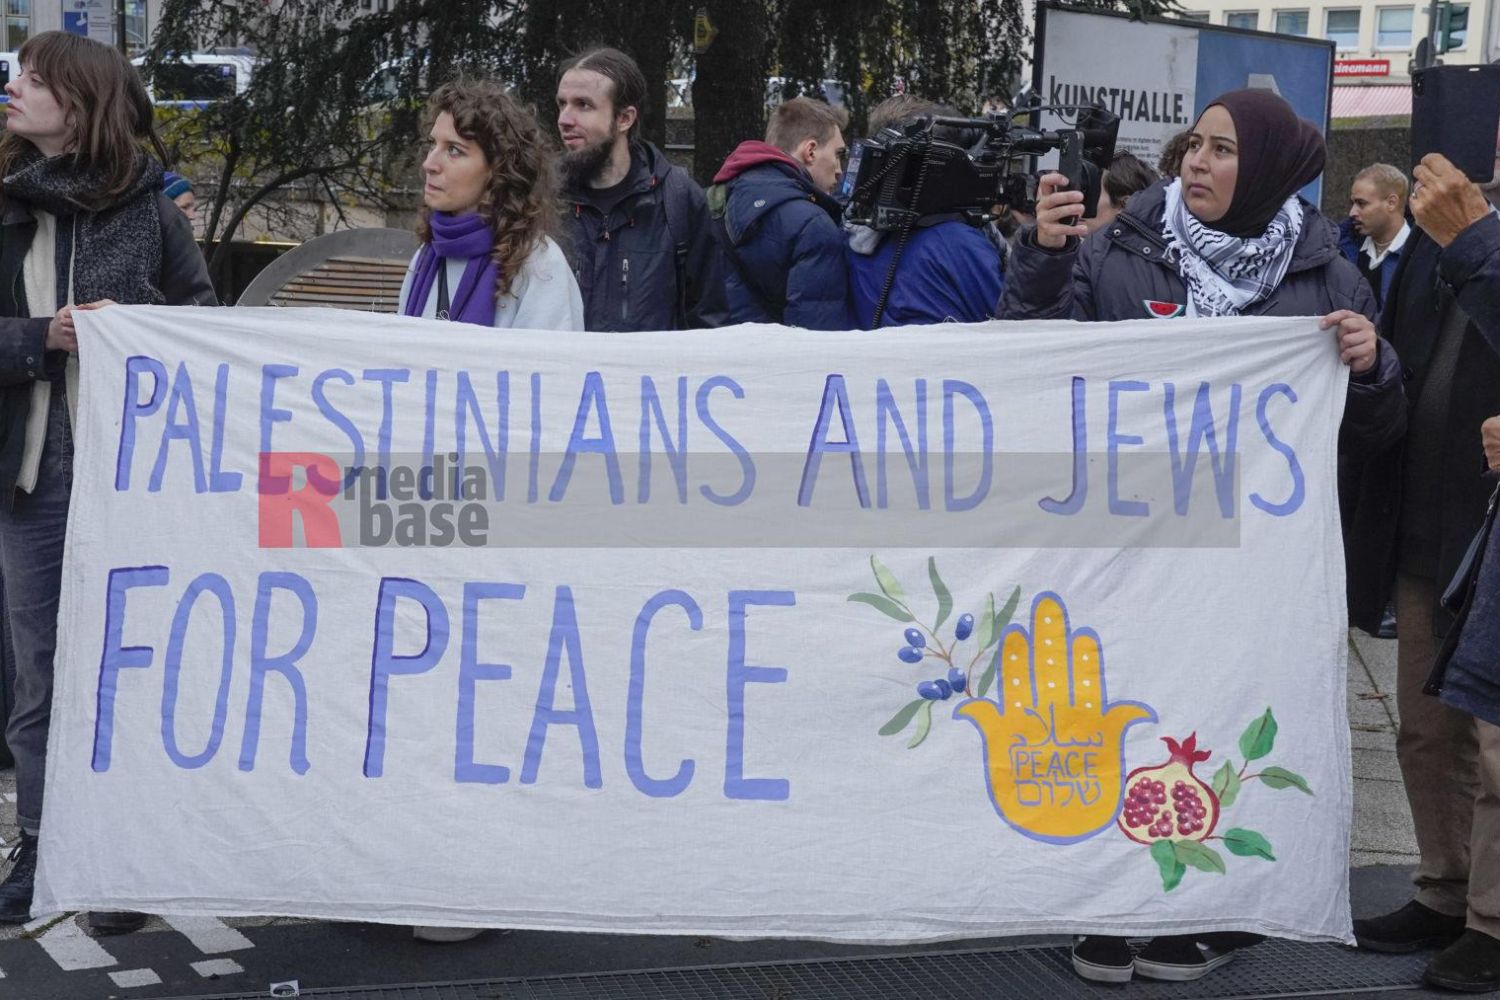 Palistinians and Jews FOR PEACE <i>Bild jovofoto/R-mediabase</i> <br><a href=/confor2/?bld=77738&pst=77735&aid=23&dc=1557&i1=jovofoto/R-mediabase>Anfrage Download Bild 77738</a>  <a href=/wp-admin/post.php?post=77738&action=edit> / Edit</a><br><a href=/?p=77735>Zum Beitrag 77735</a>